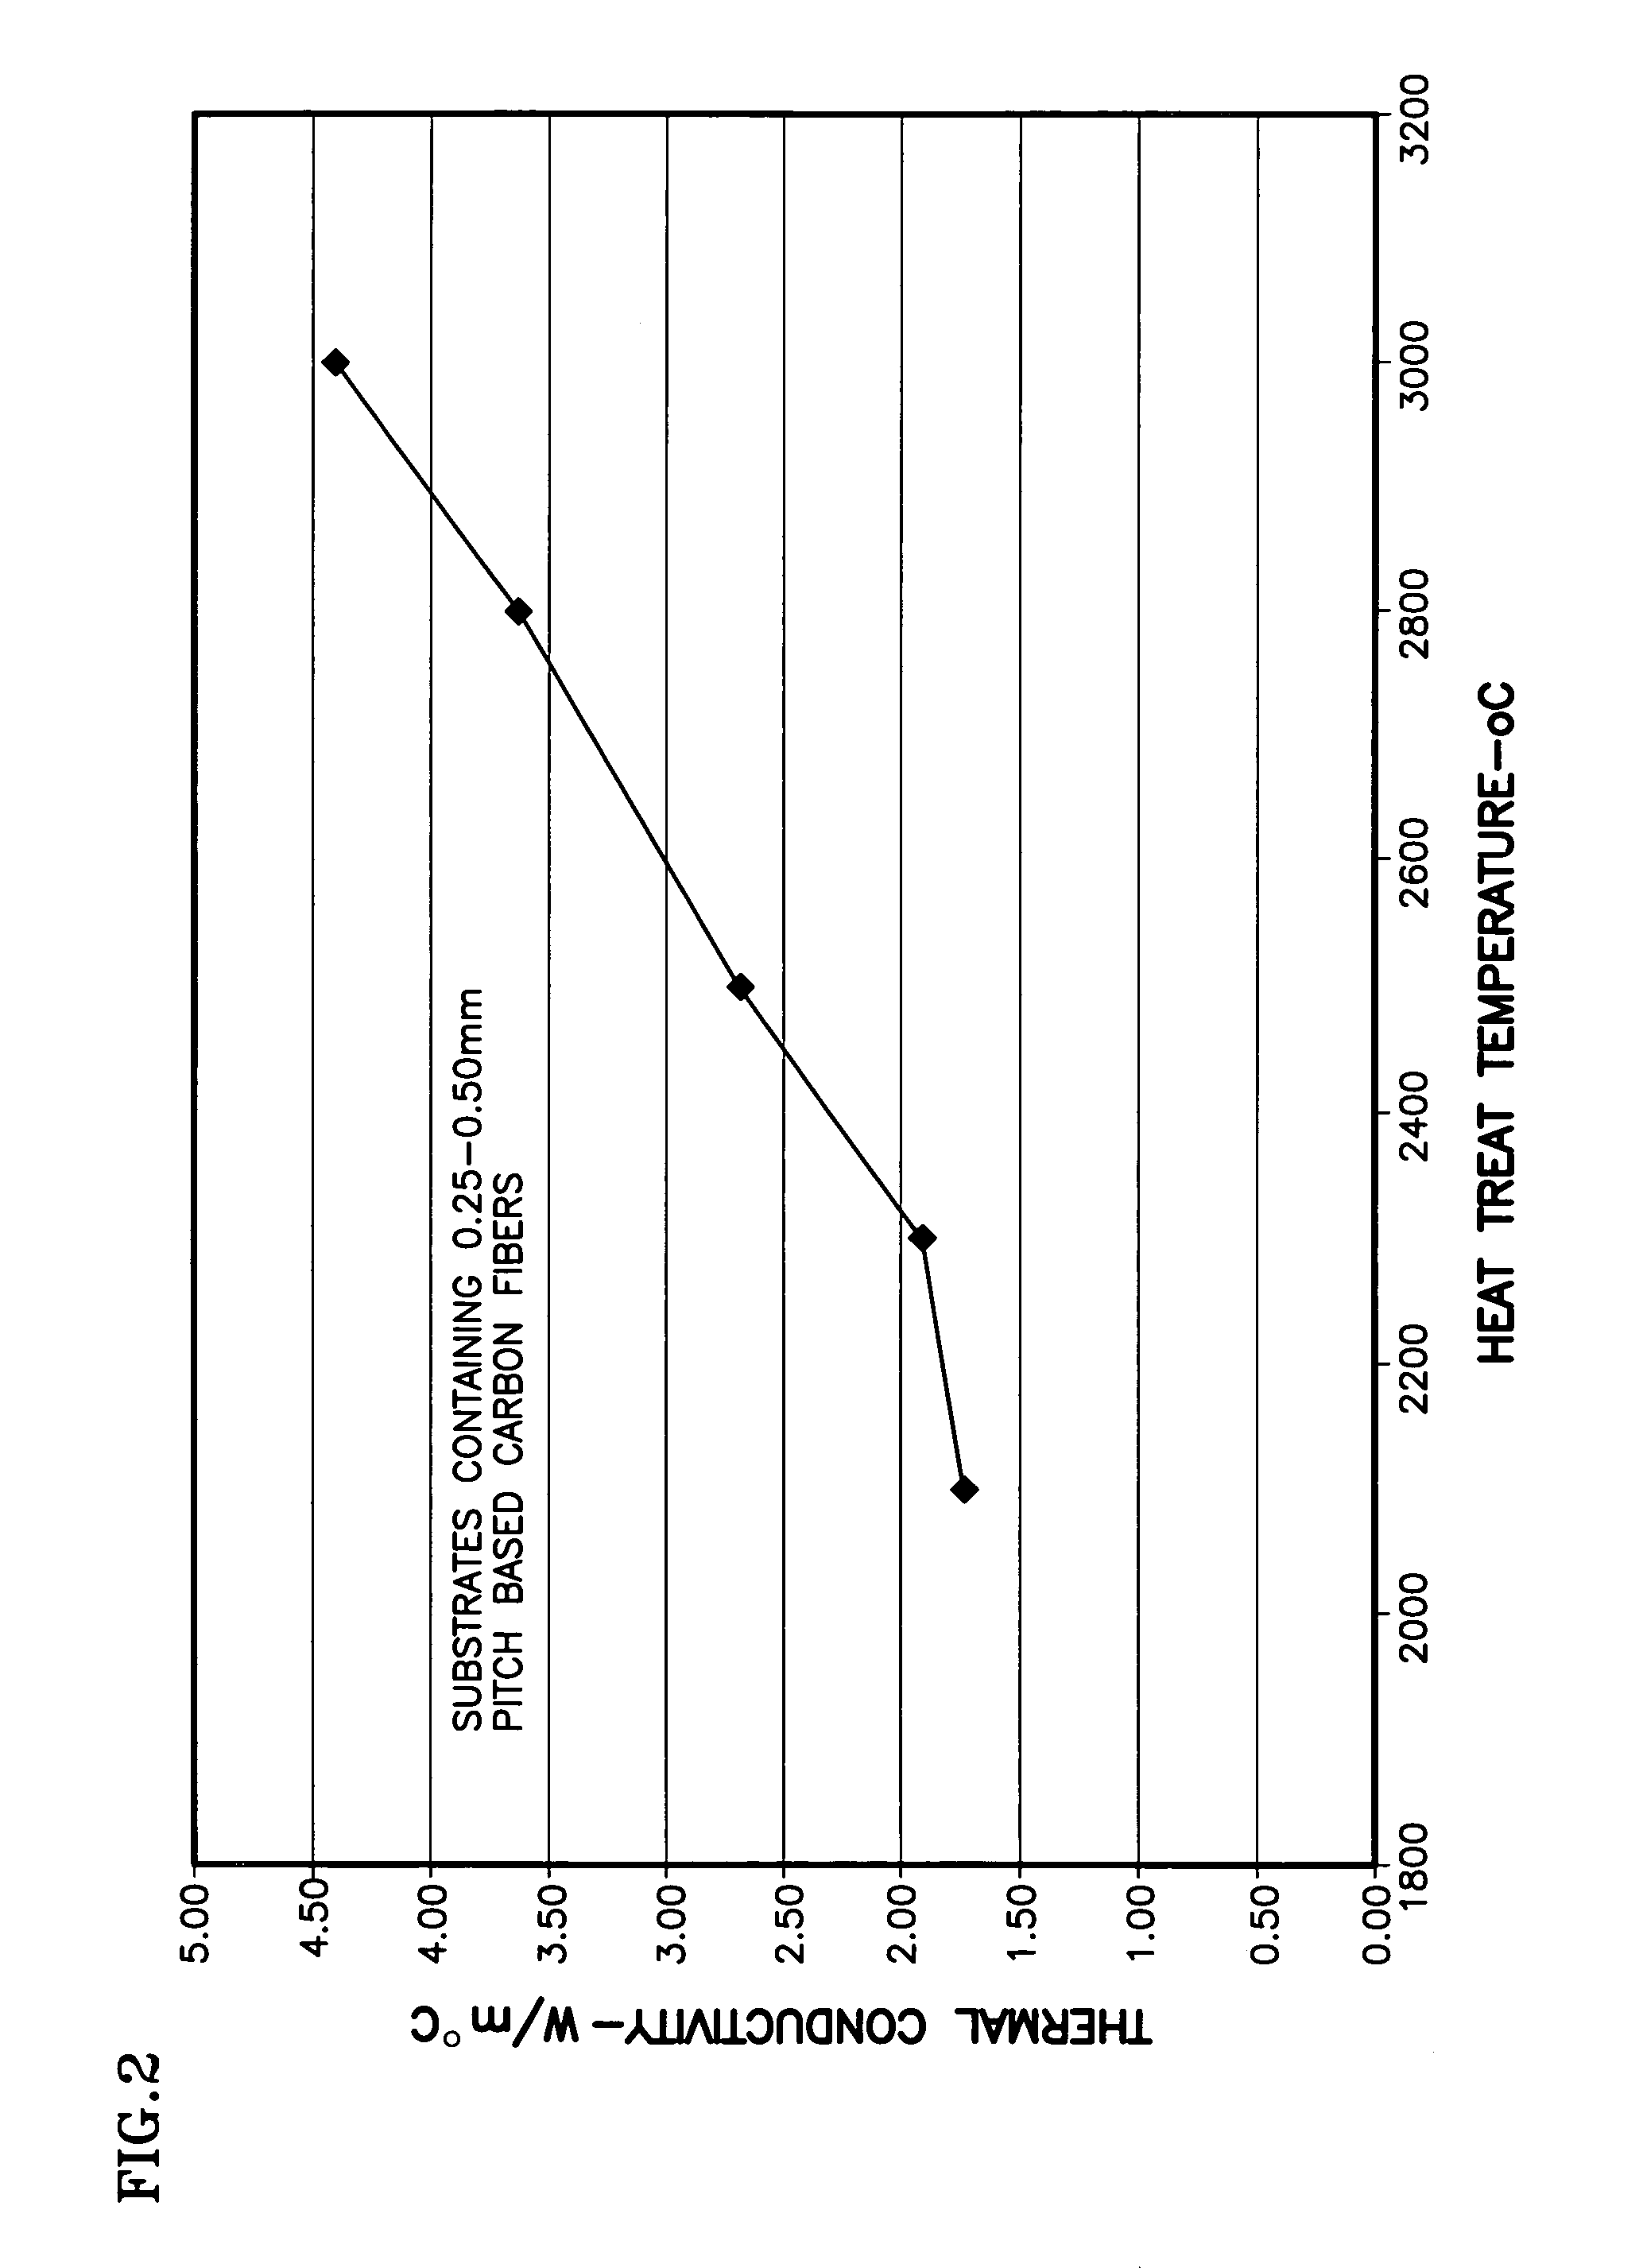 Fuel cell with thermal conductance of anode greater than cathode